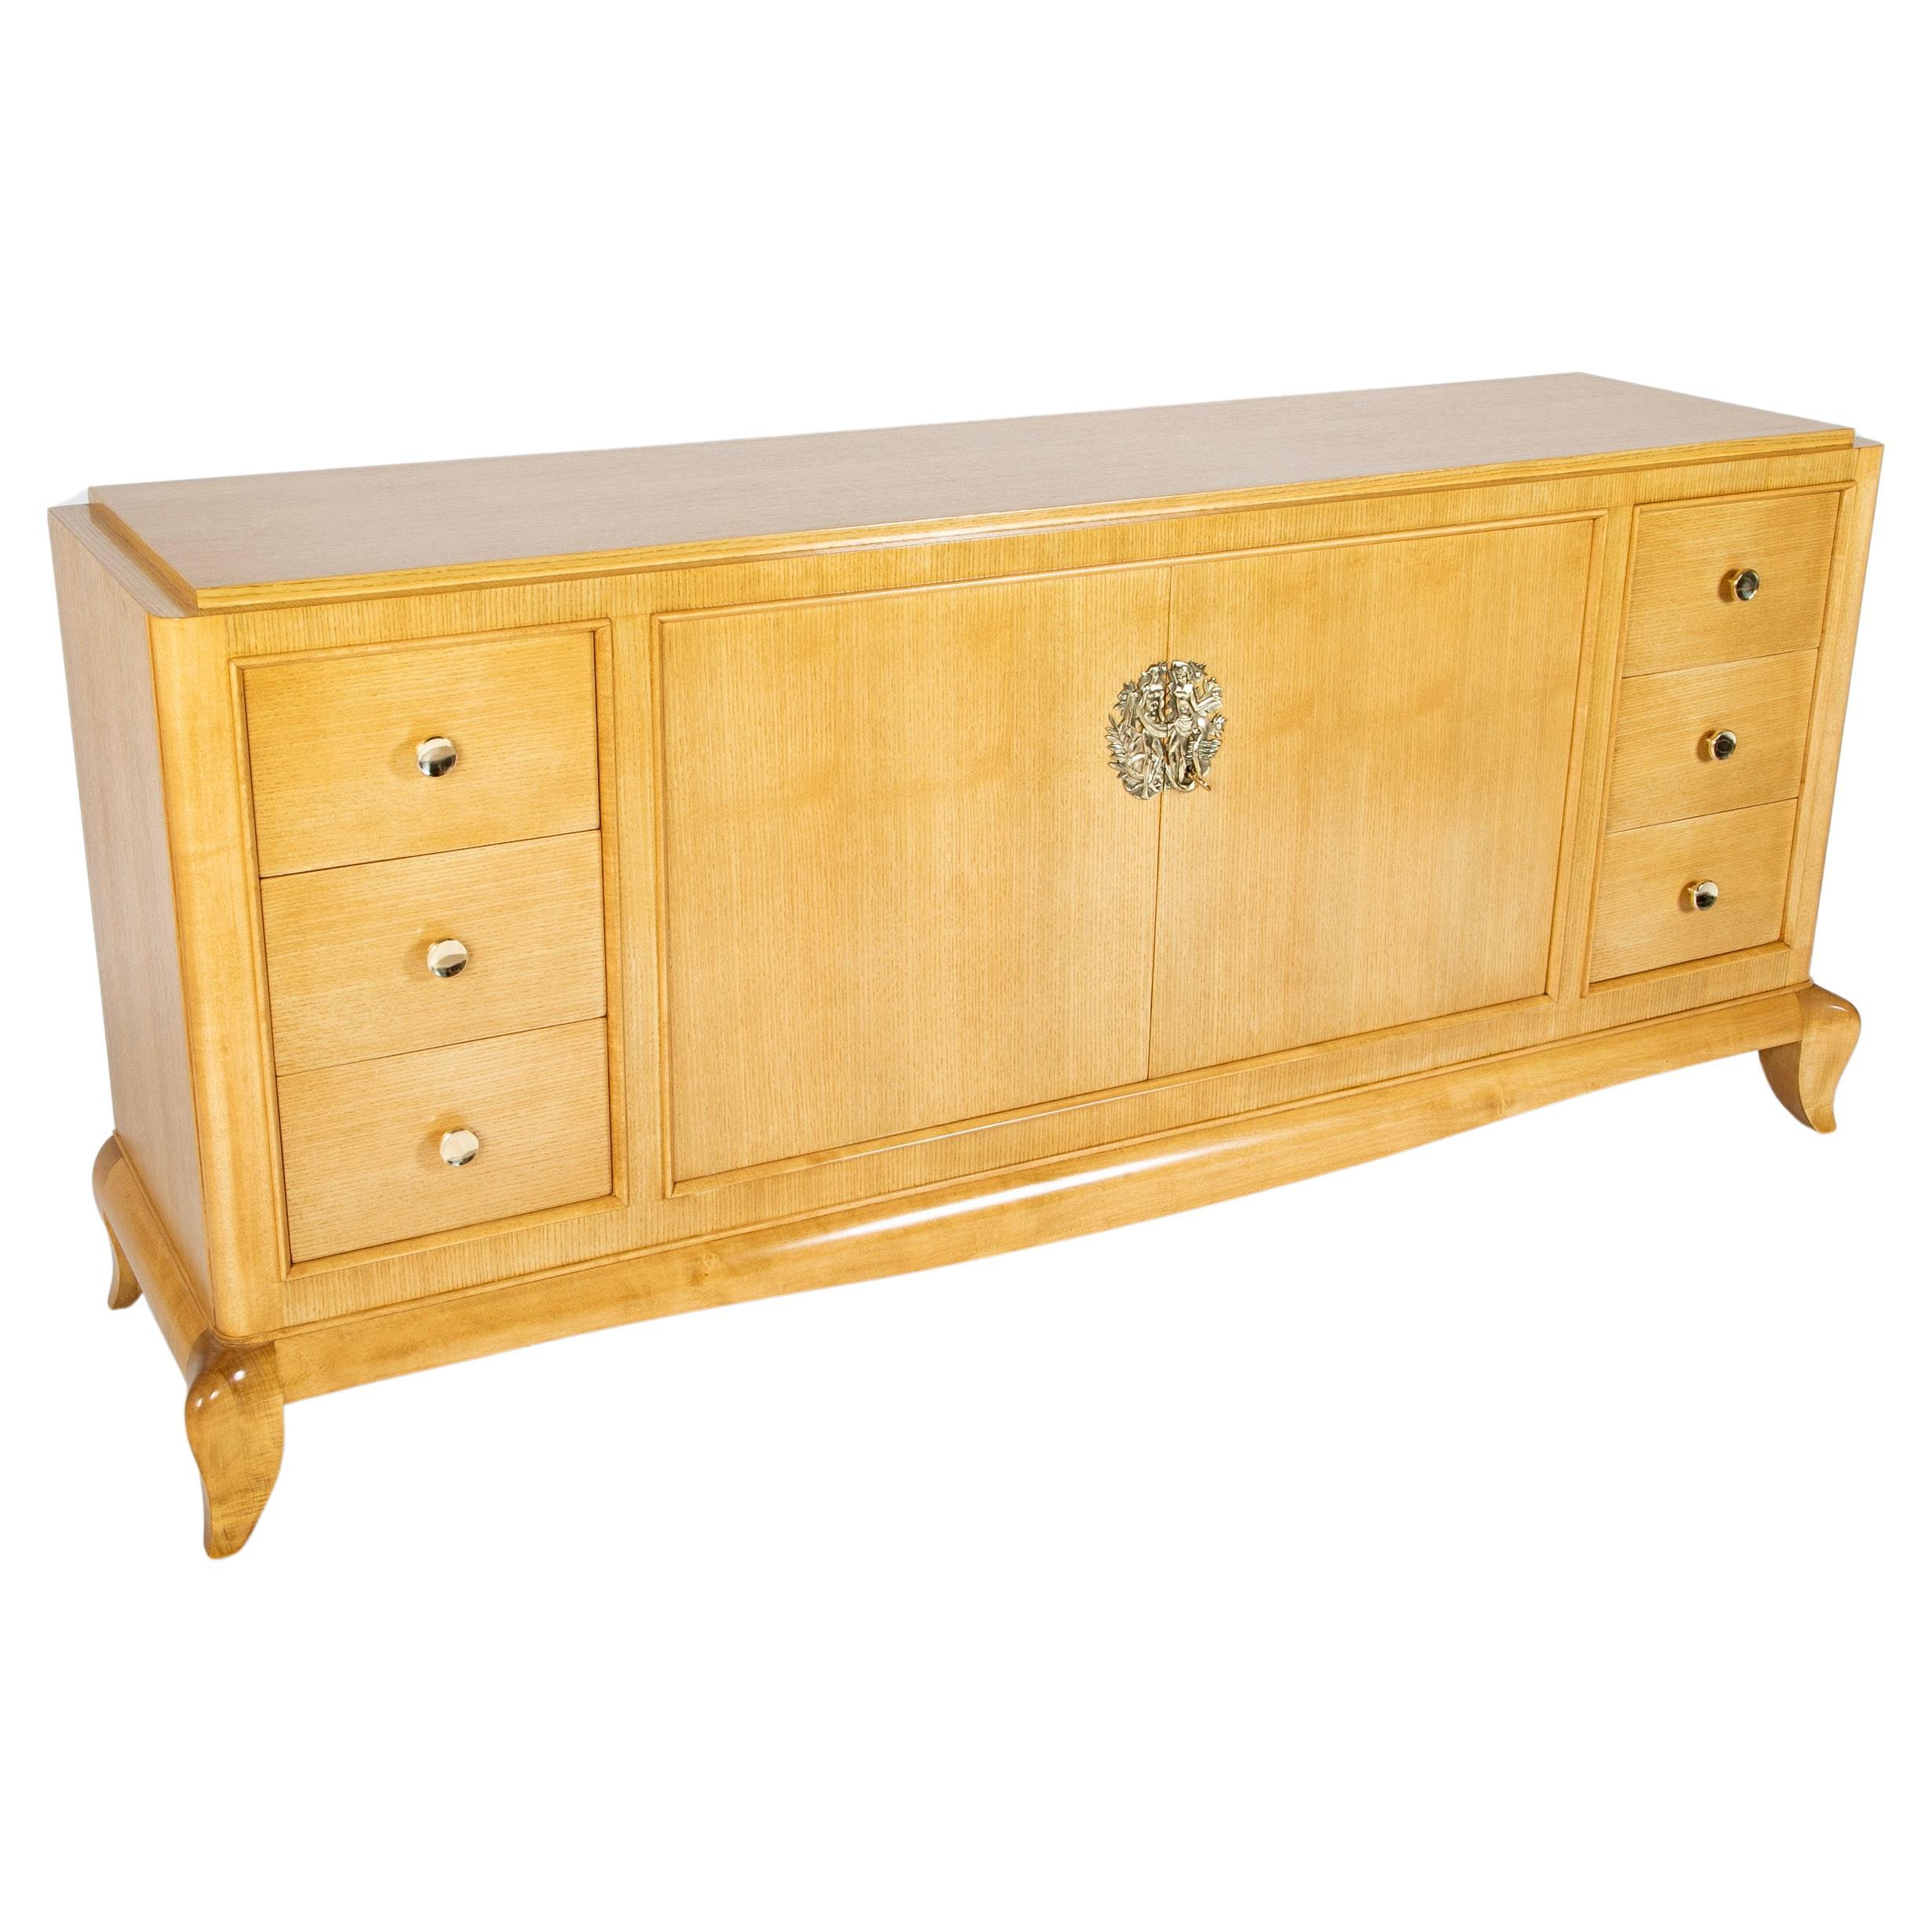 French School of Arbus Credenza in Light Wood with Adam & Eve Medallion For Sale